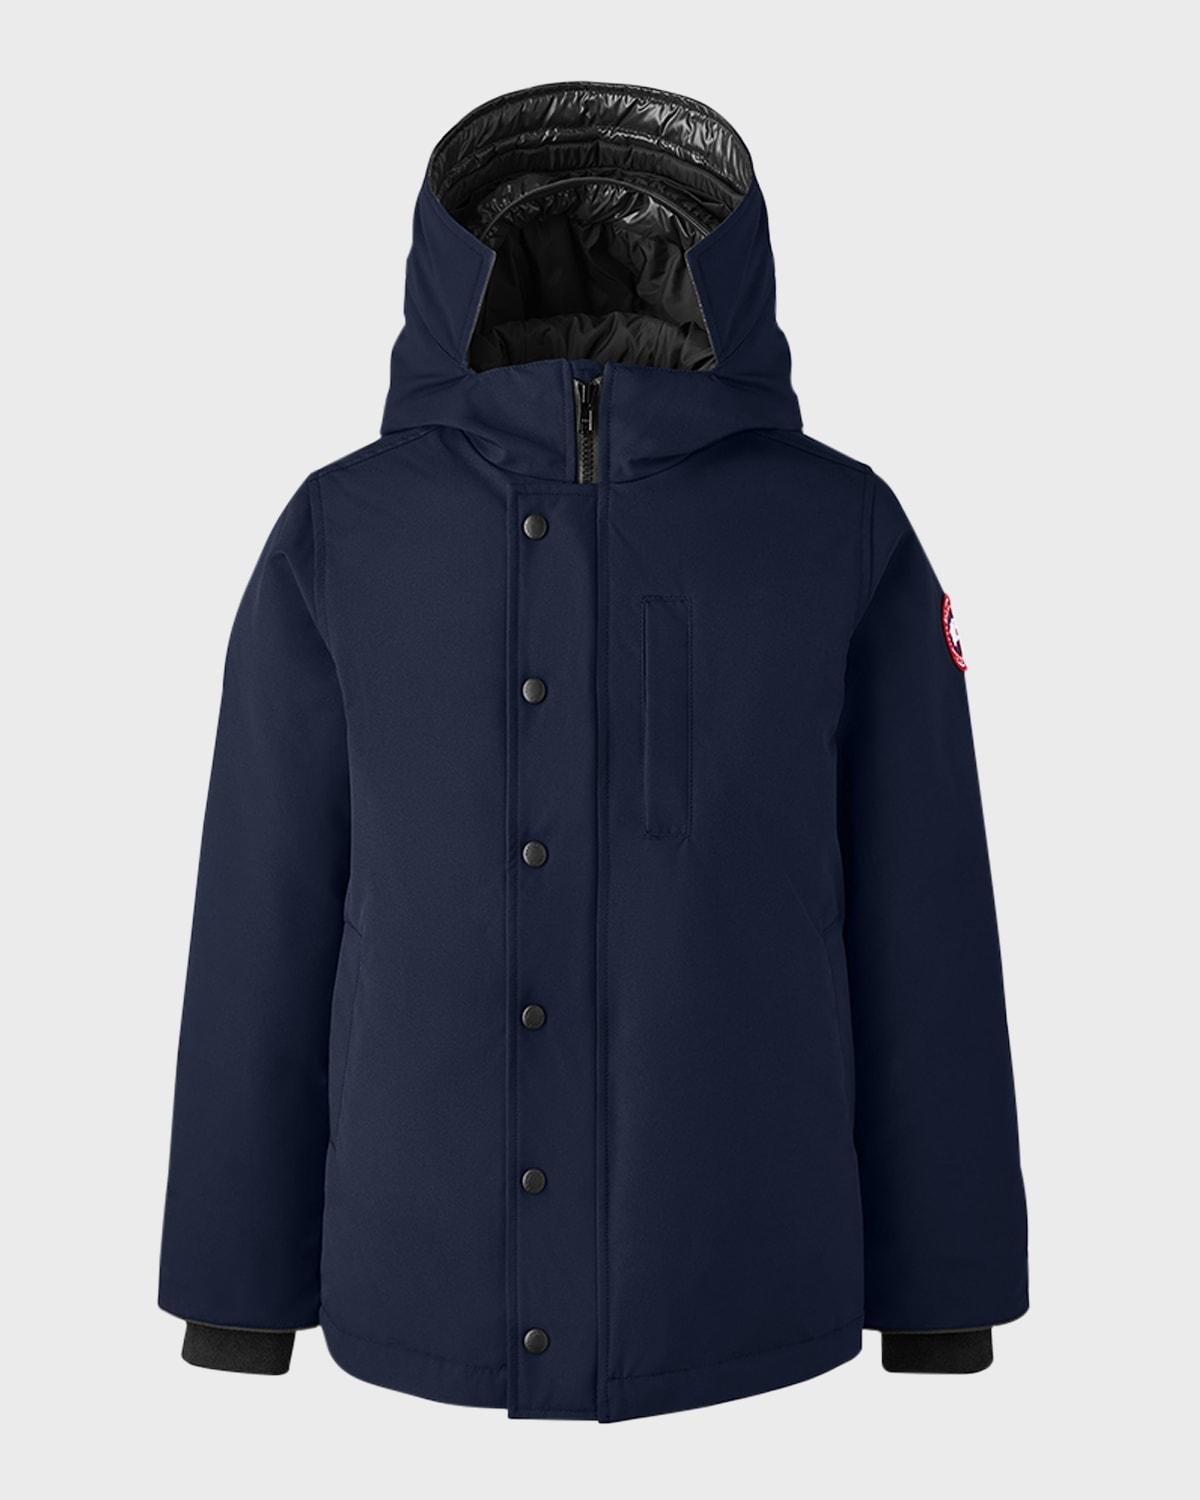 Kid's Logan Hooded Down Parka, Size S-L by CANADA GOOSE